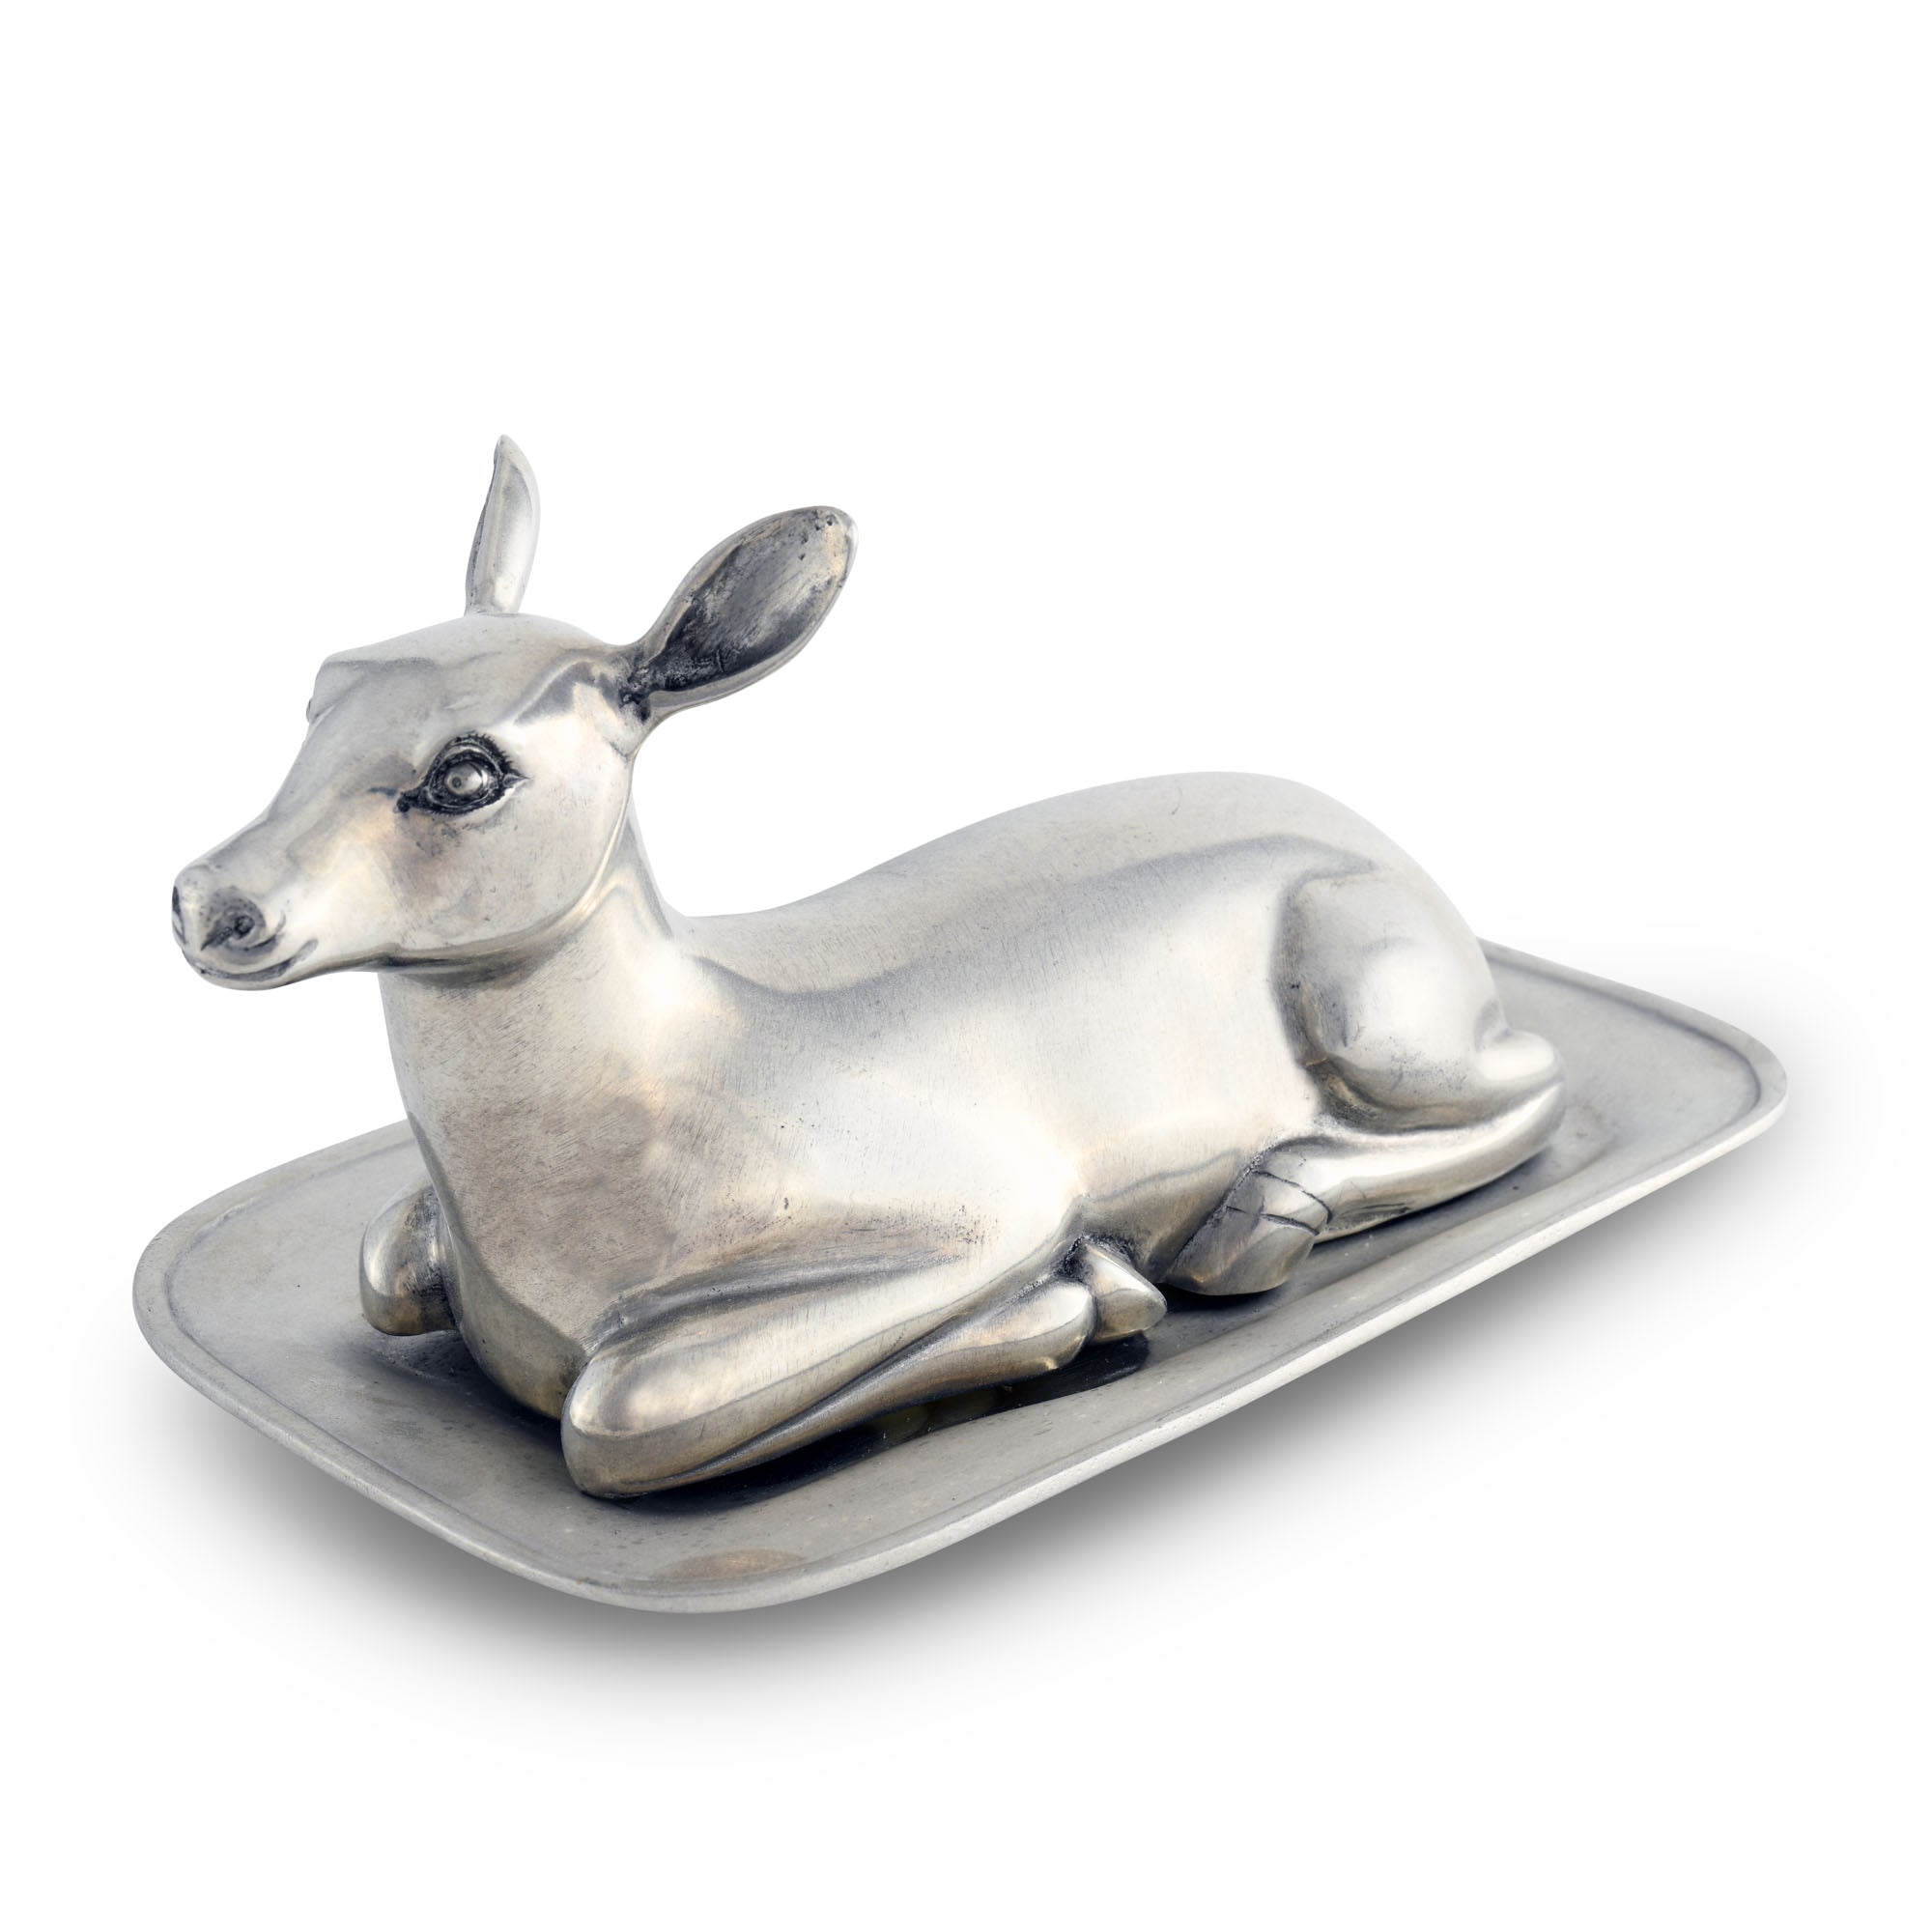 Vagabond House Pewter Doe Butter Dish Product Image